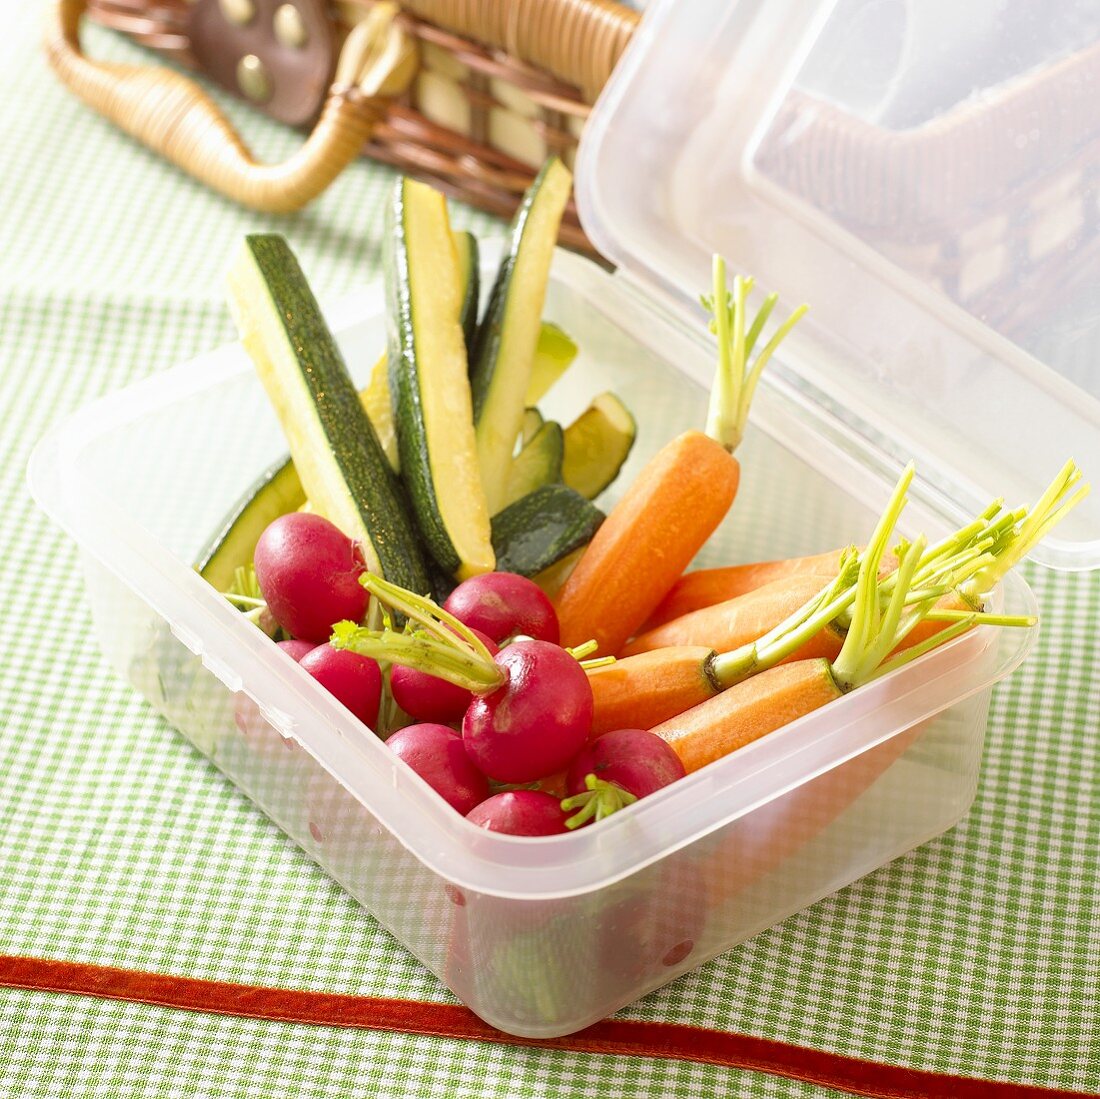 Carrots, radishes and courgettes in a plastic box